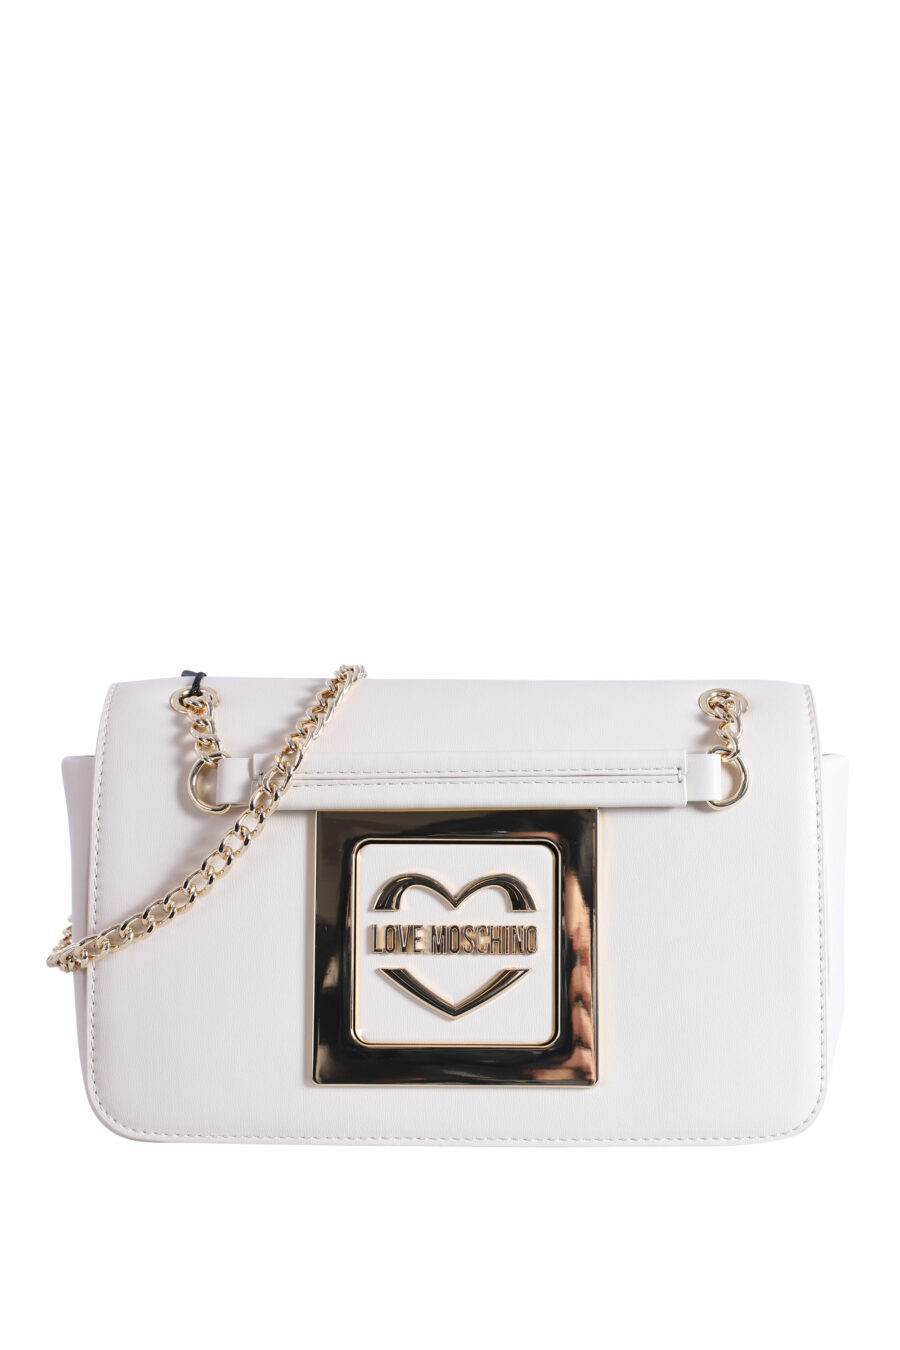 Beige shoulder bag with gold logo and chain - IMG 2880